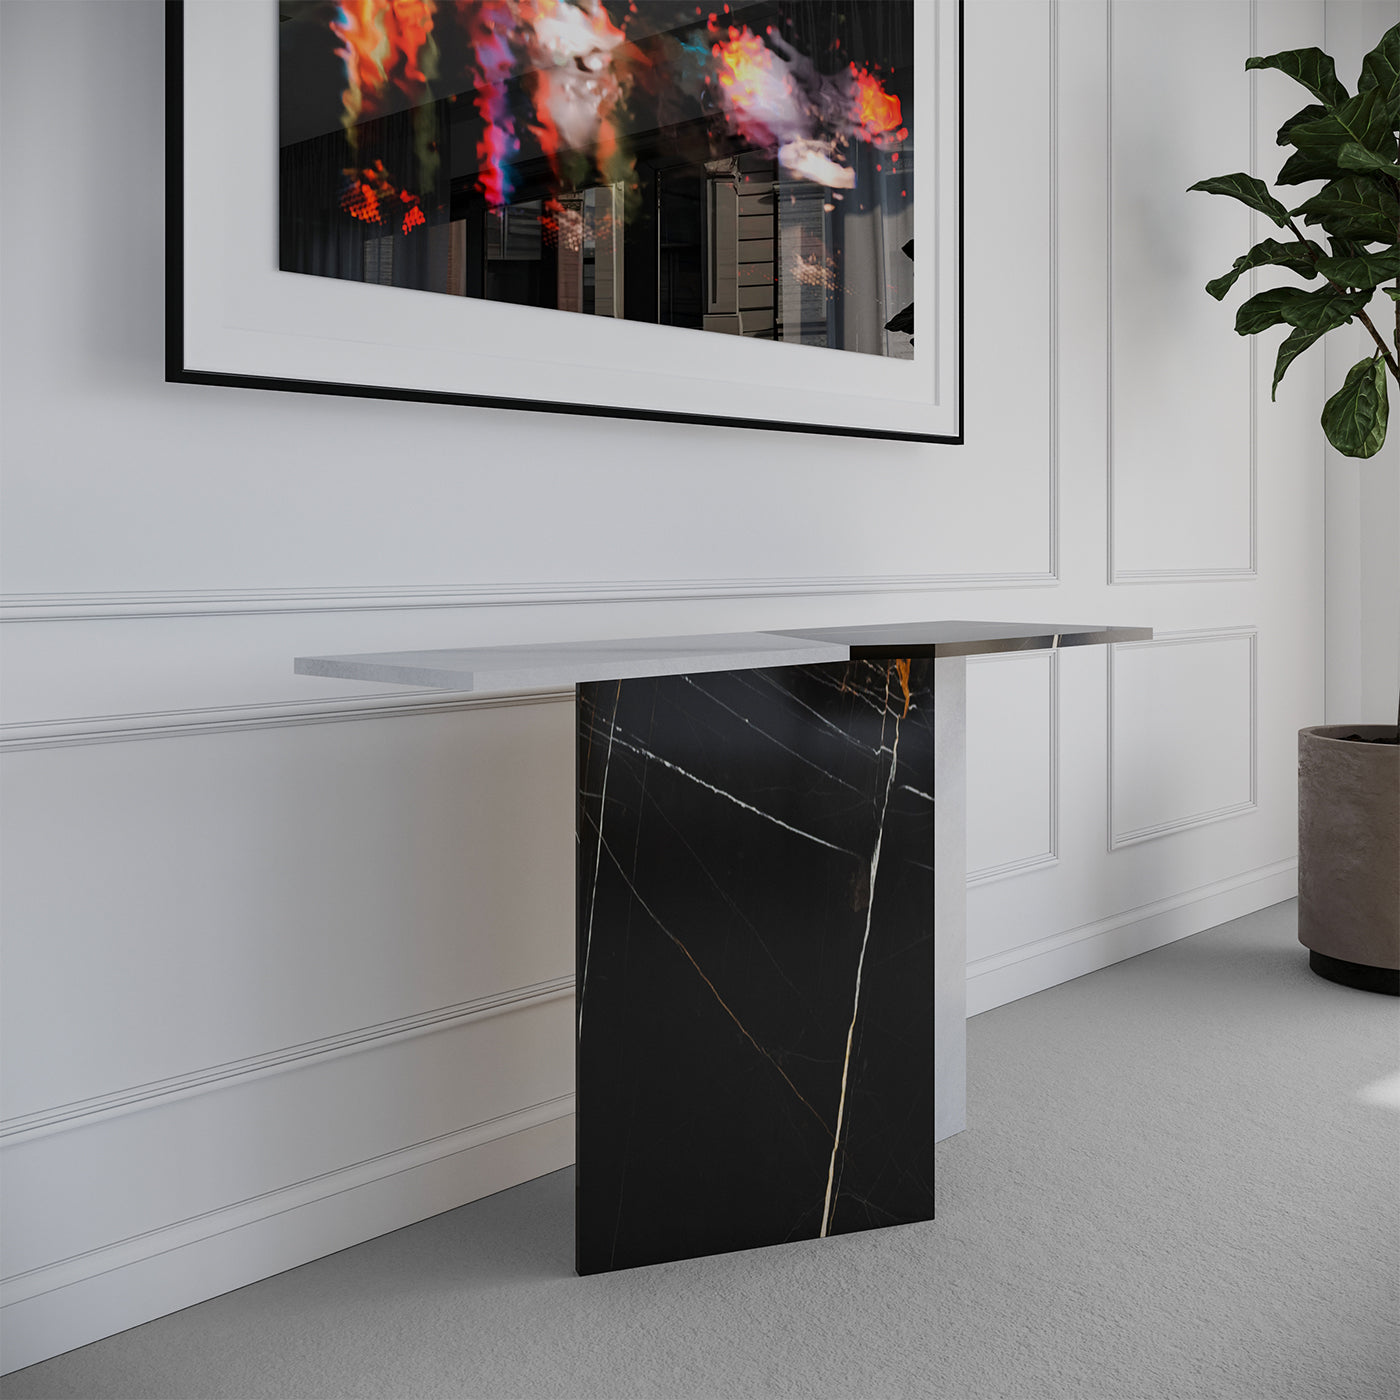 Zion Sahara Noir and Bianco T Marble Console by Paolo Ciacci - Alternative view 3